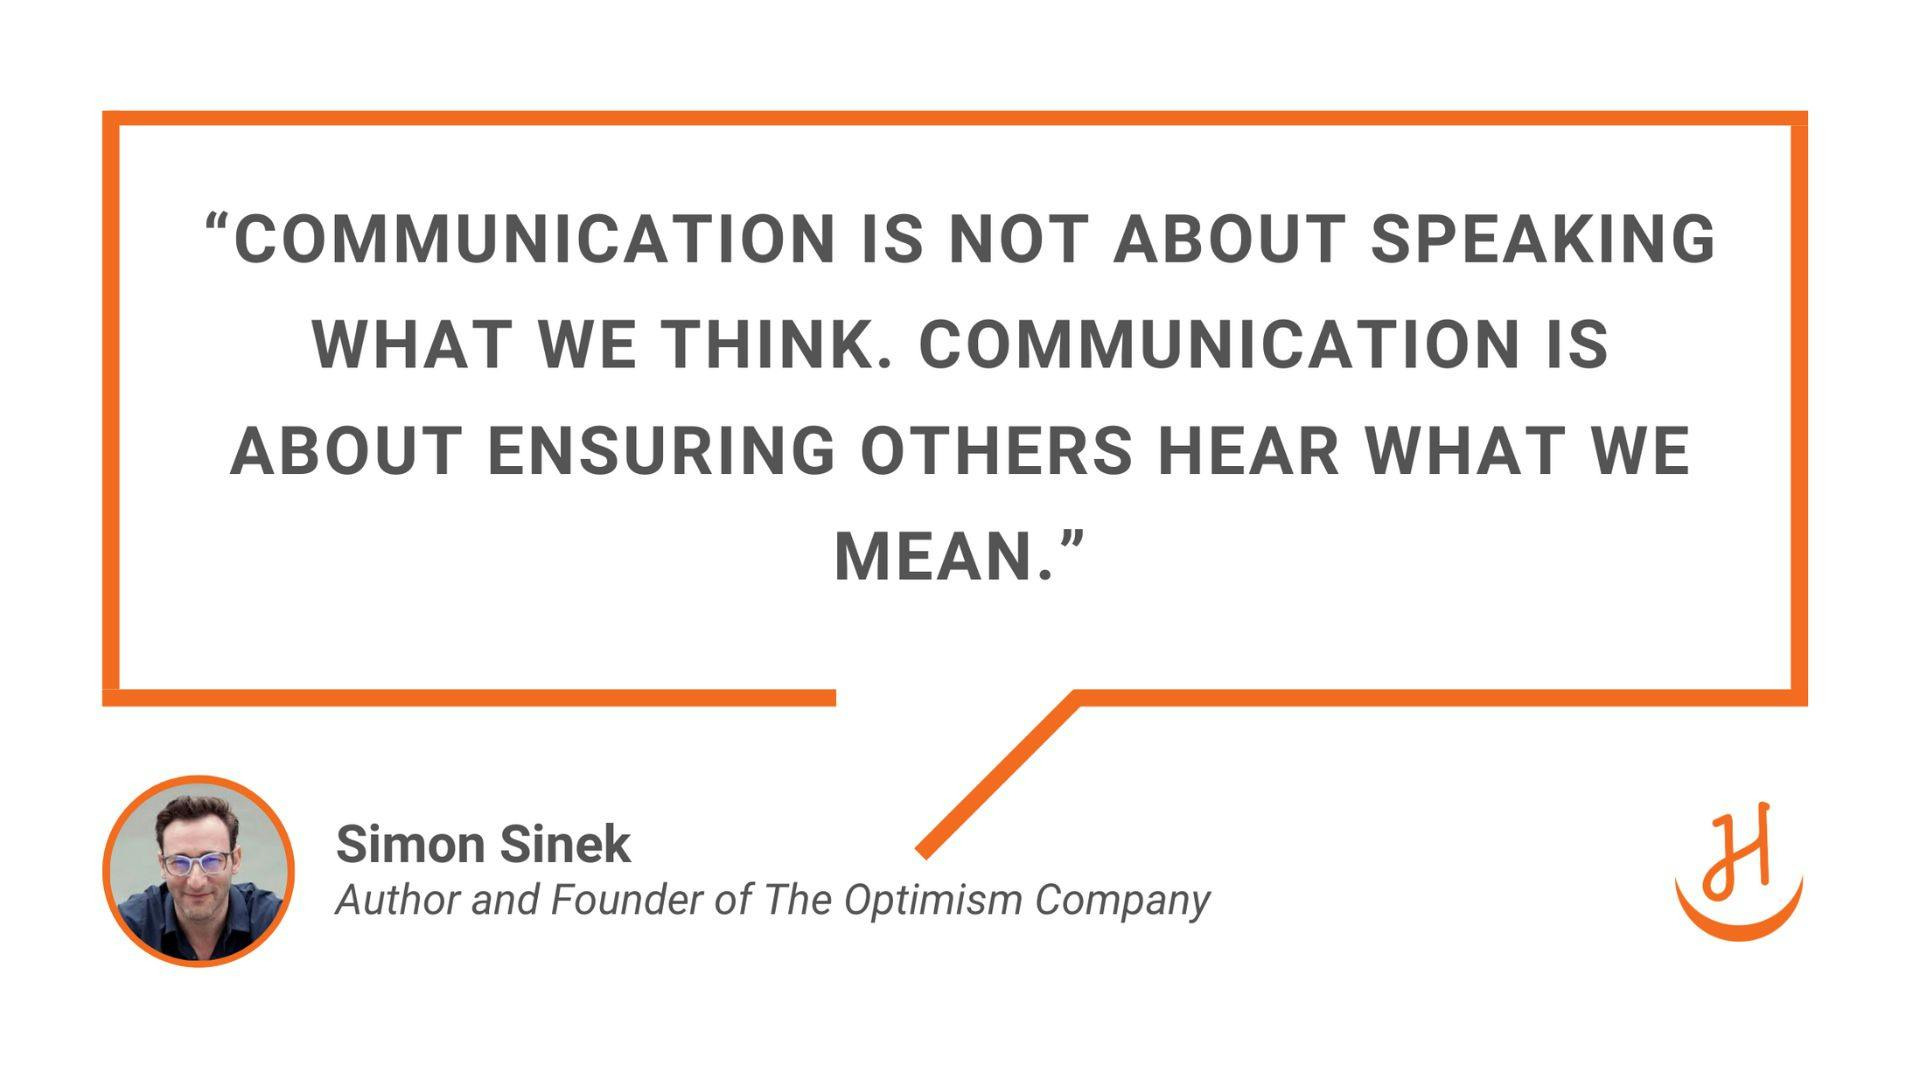 "Communication is not about speaking what we think. Communication is about ensuring others hear what we mean." Quote by Simon Sinek, Author and Founder of The Optimism Company.